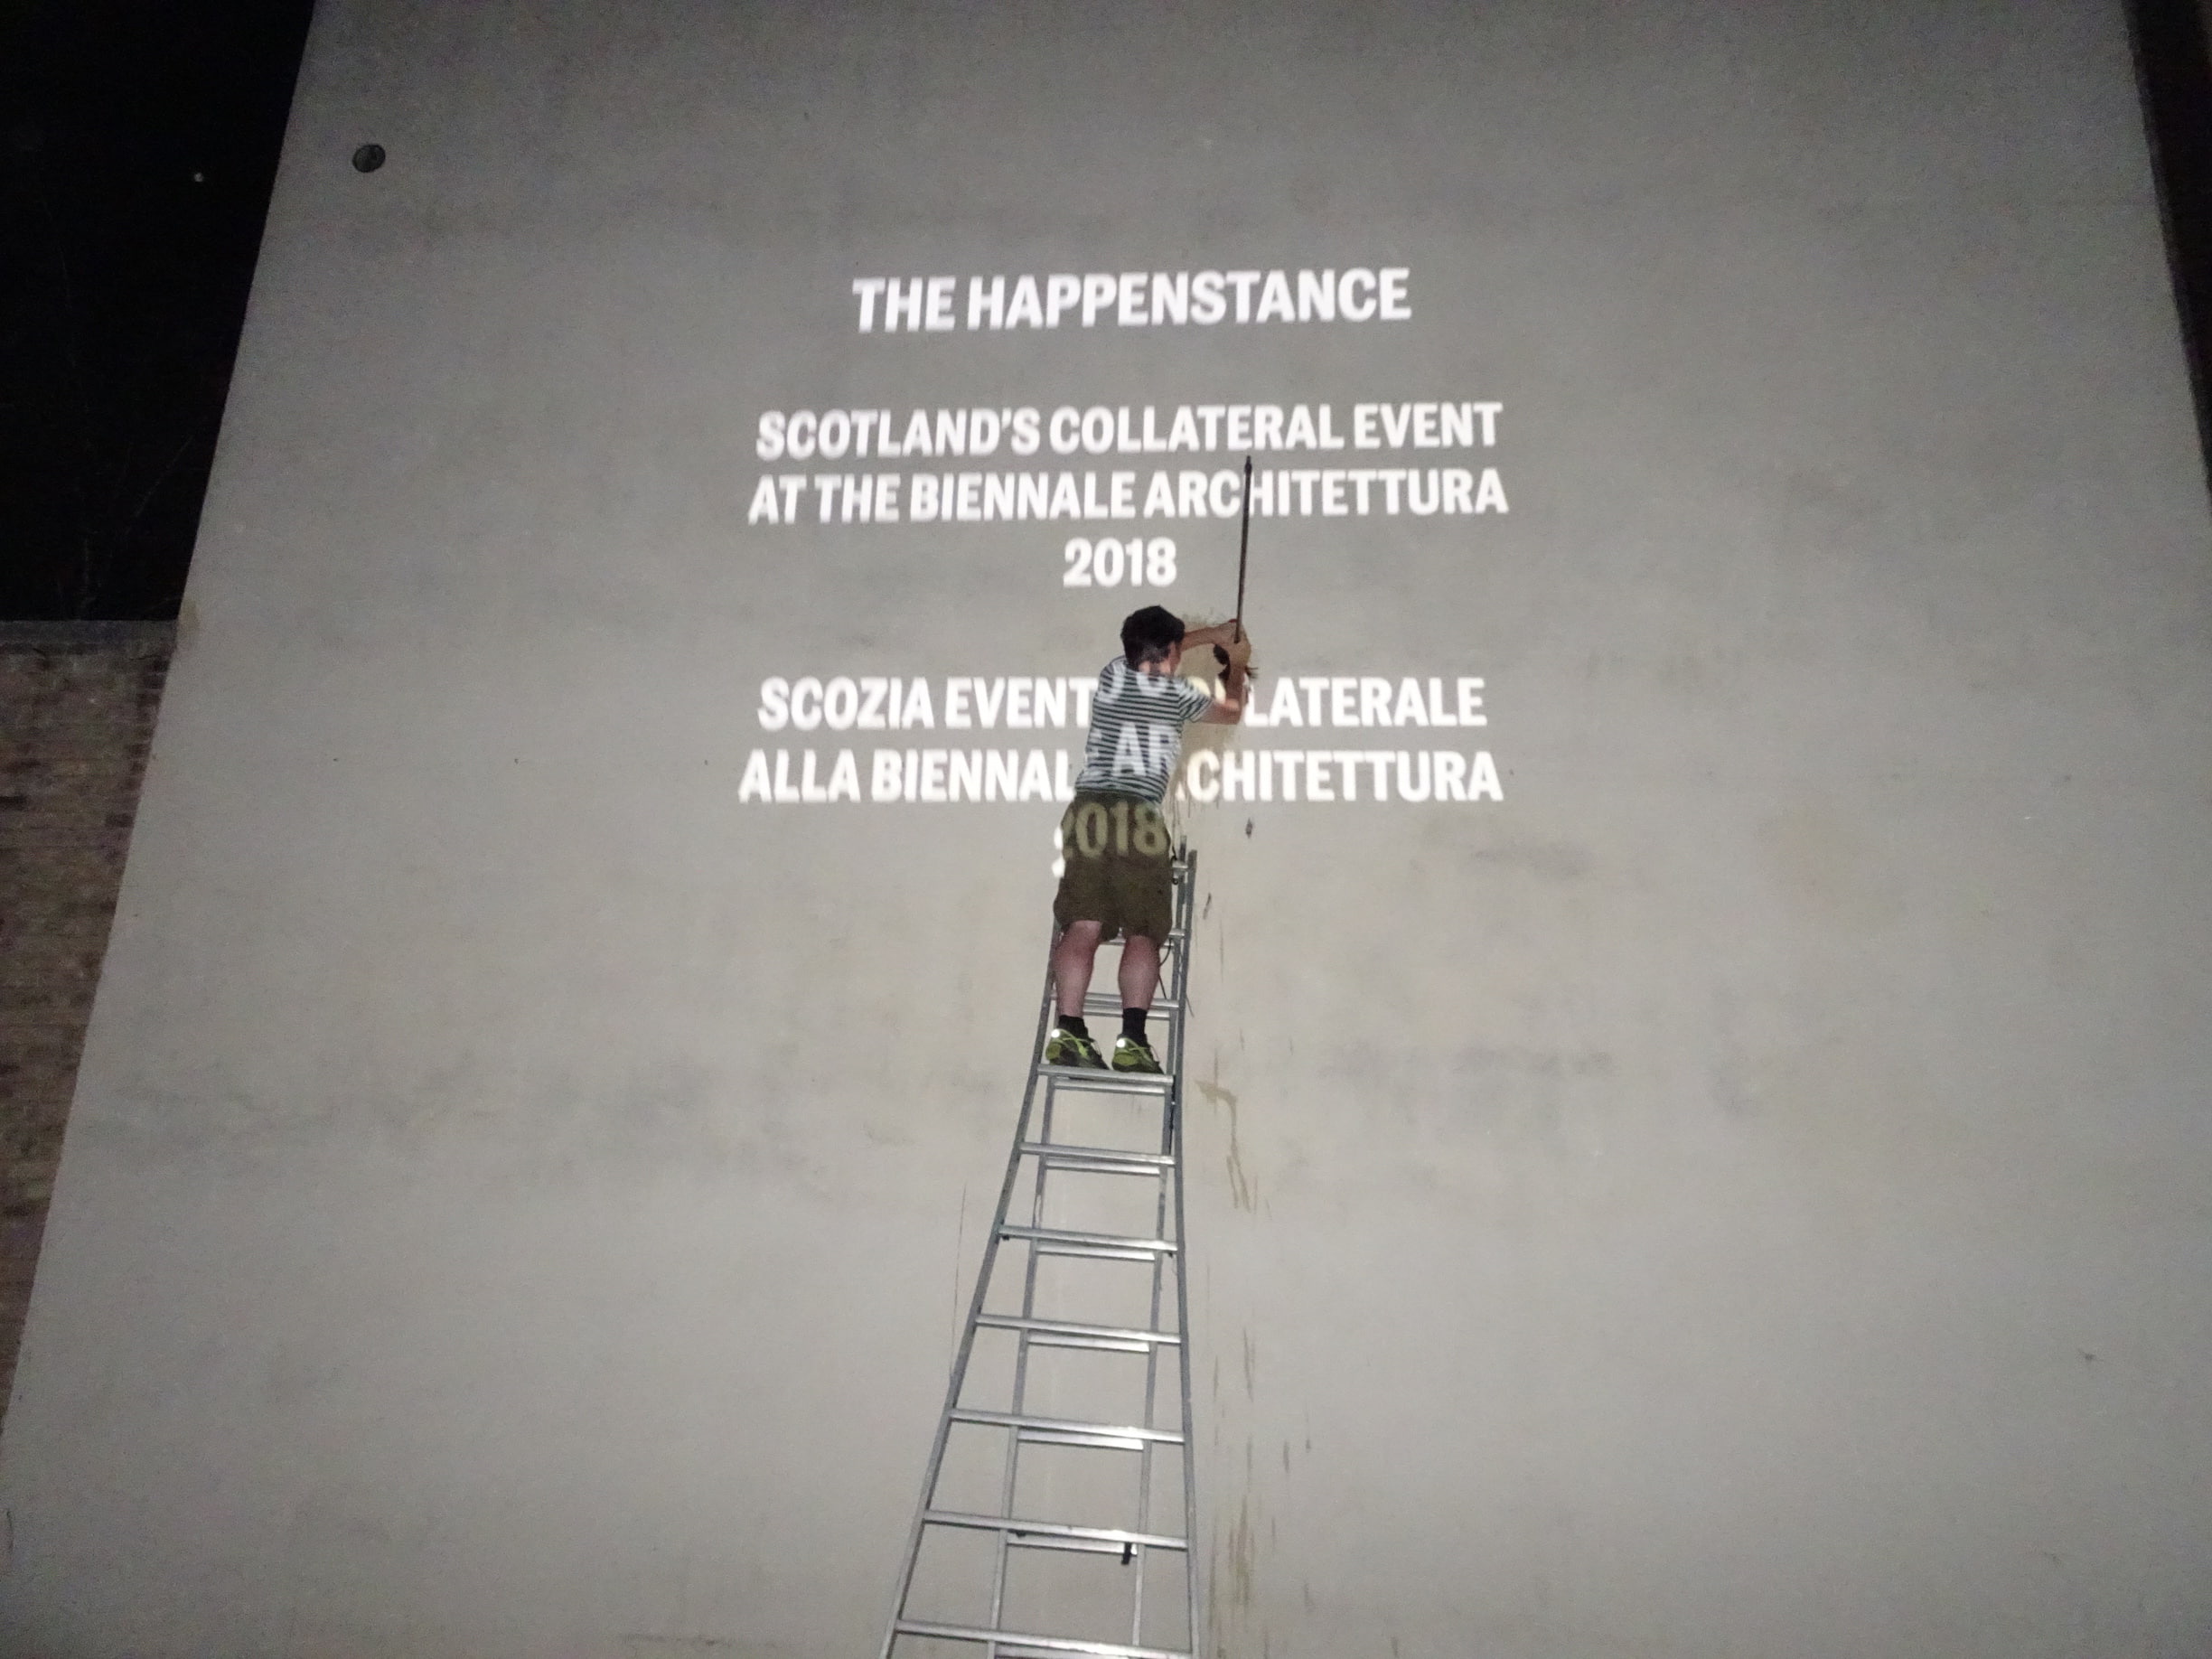 The Happenstance curator Peter McCaughey is up a ladder cleaning the project’s vast screening wall.